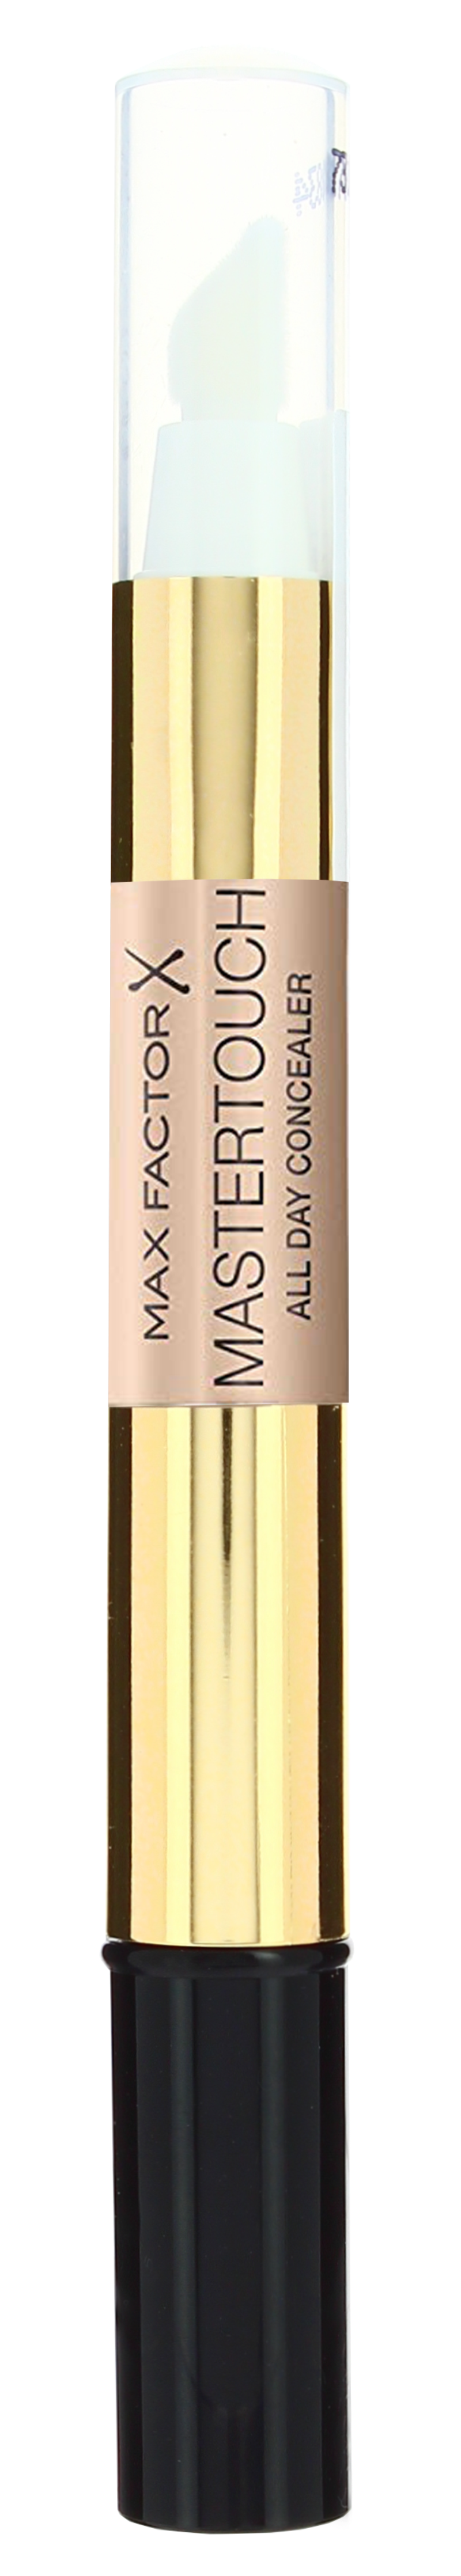 Max Factor - Mastertouch Concealer 3 ml